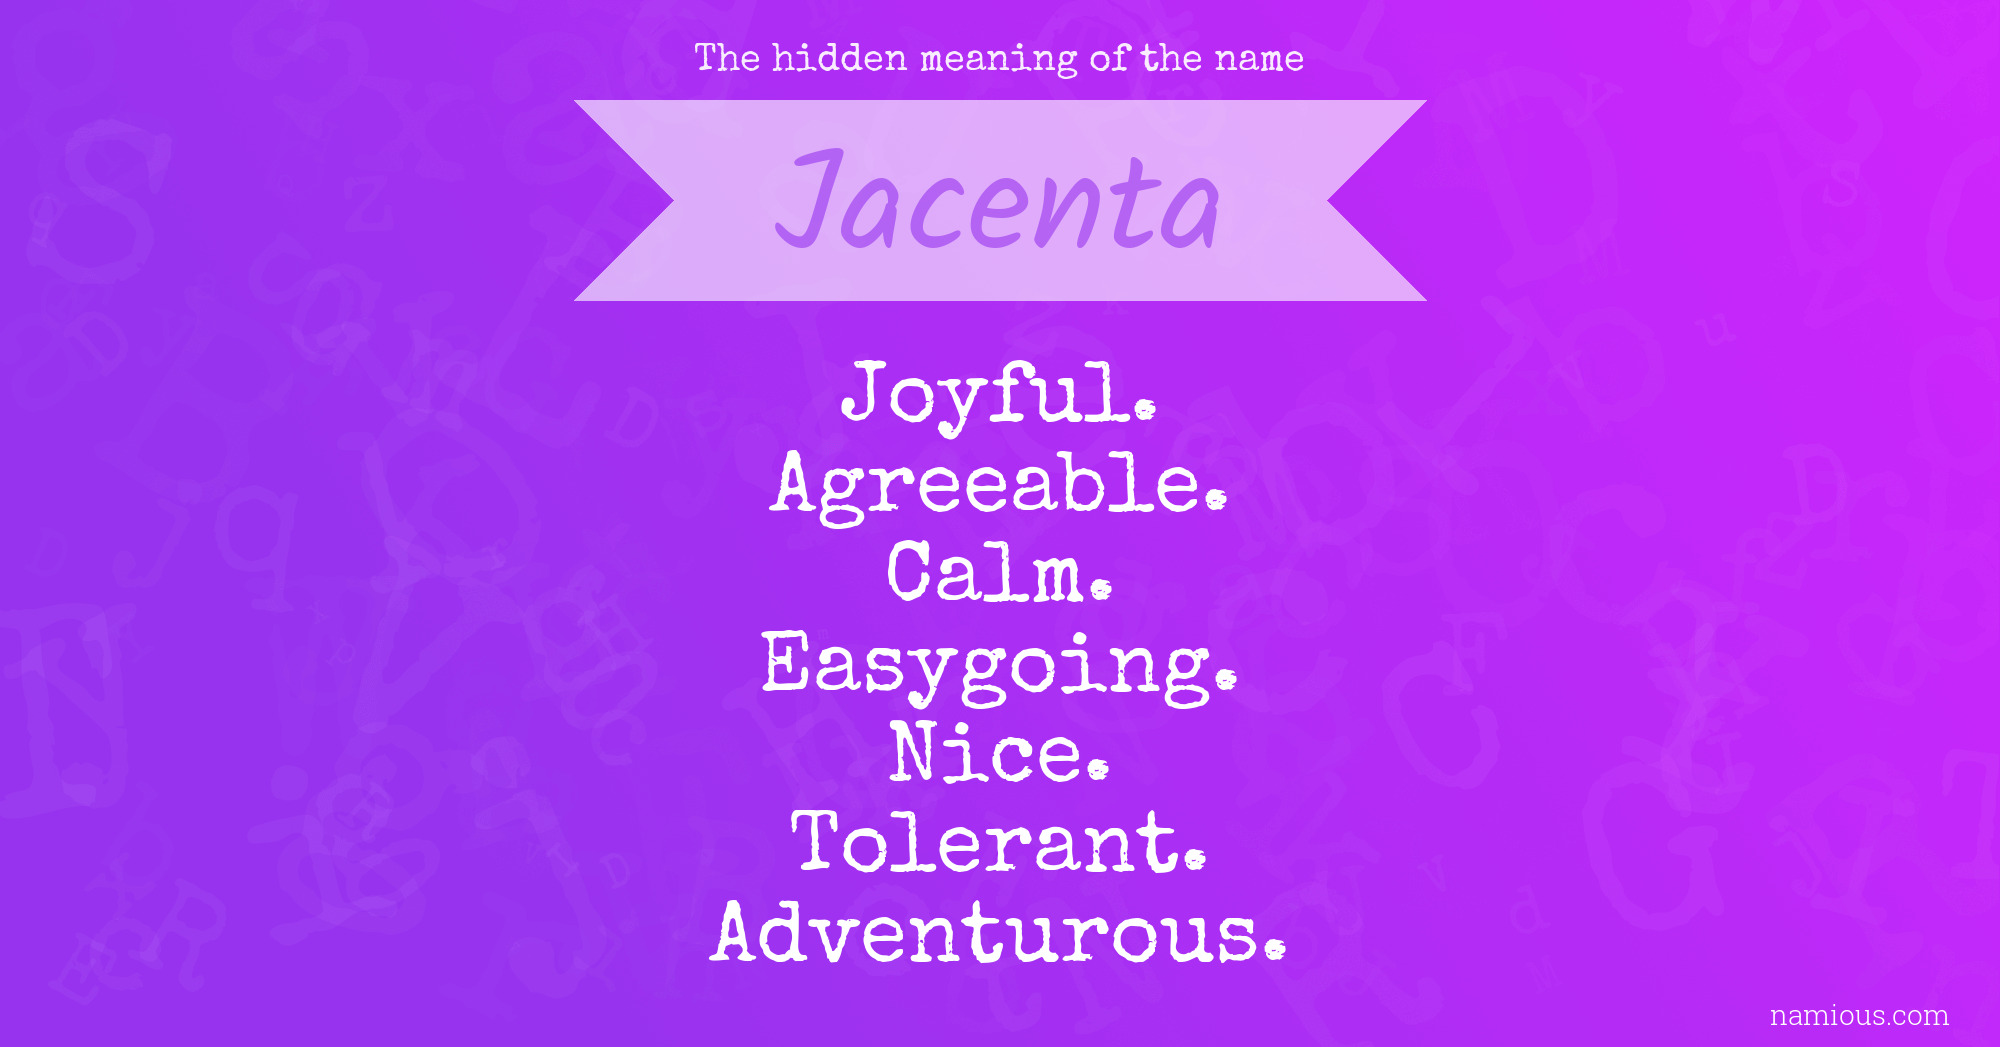 The hidden meaning of the name Jacenta